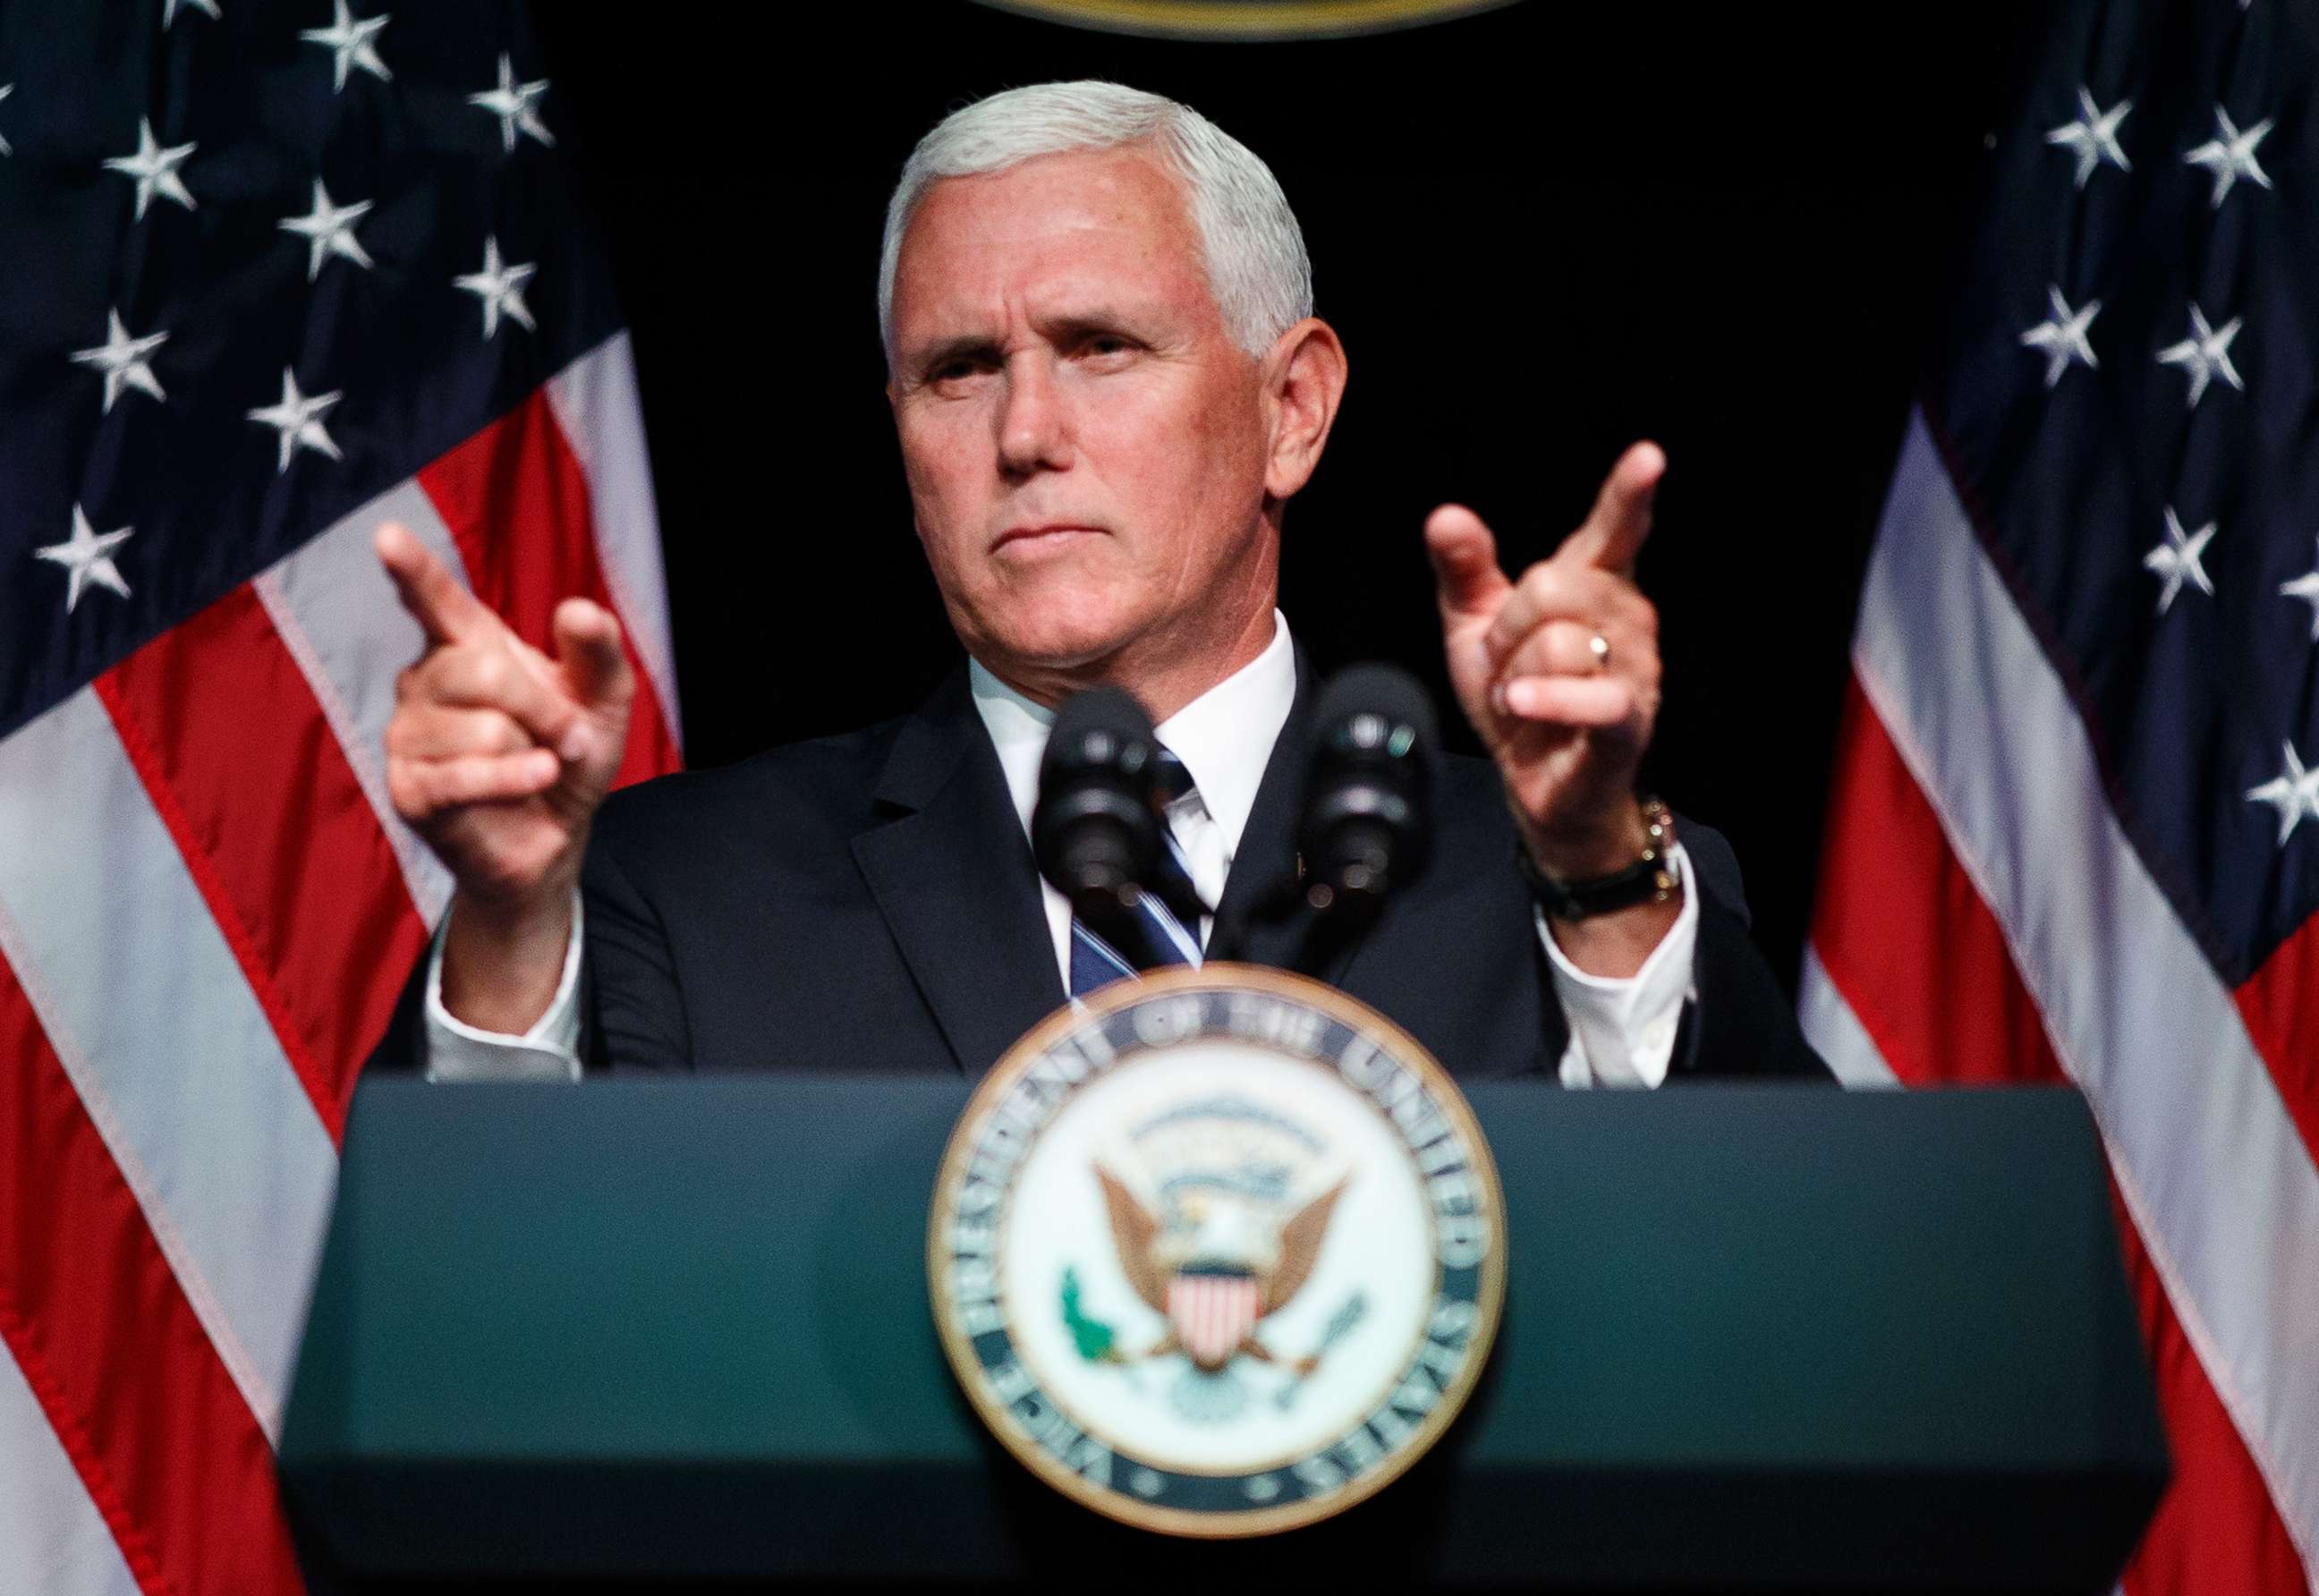 PHOTO: Vice President Mike Pence gestures during an event on the creation of a U.S. Space Force, Aug. 9, 2018, at the Pentagon.